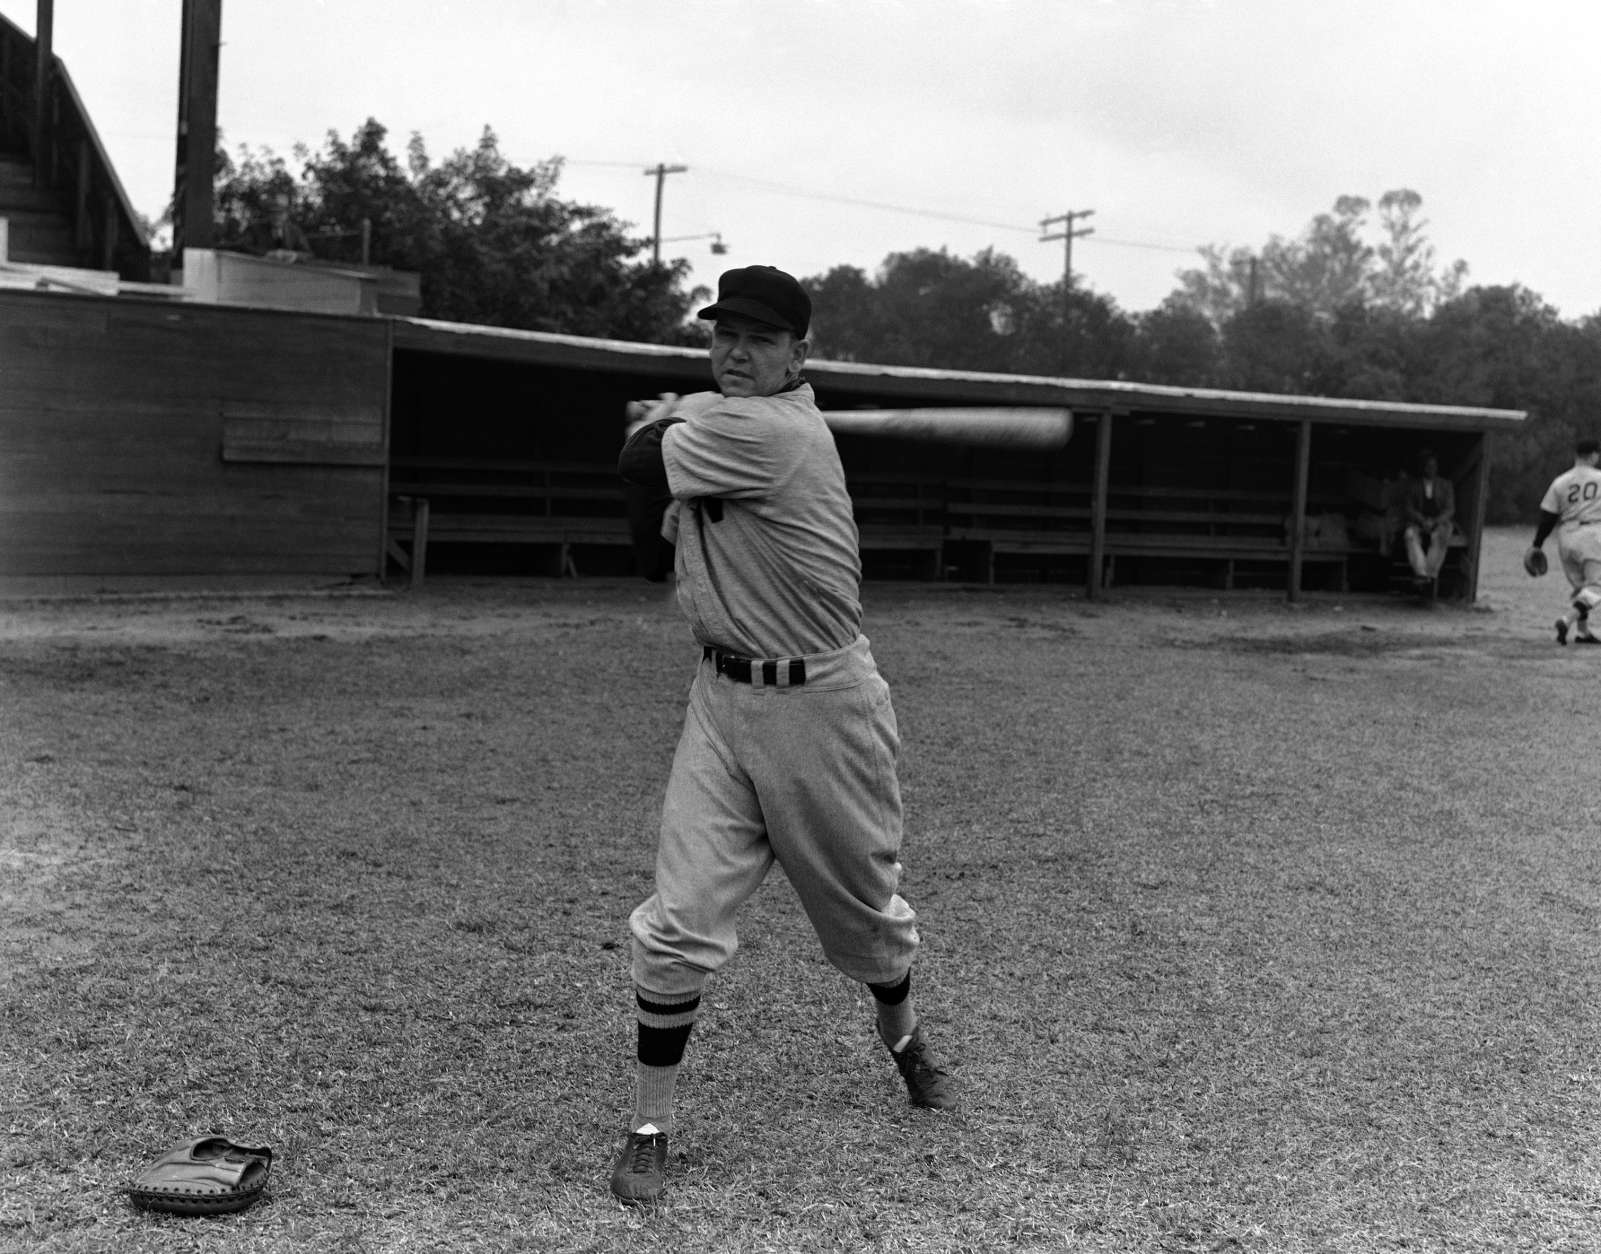 Jake Early, catcher with the Washington Senators, swings a bat in loosening up at the clubs Orlando, Fla., spring training camp, Feb. 24, 1942.  (AP Photo)